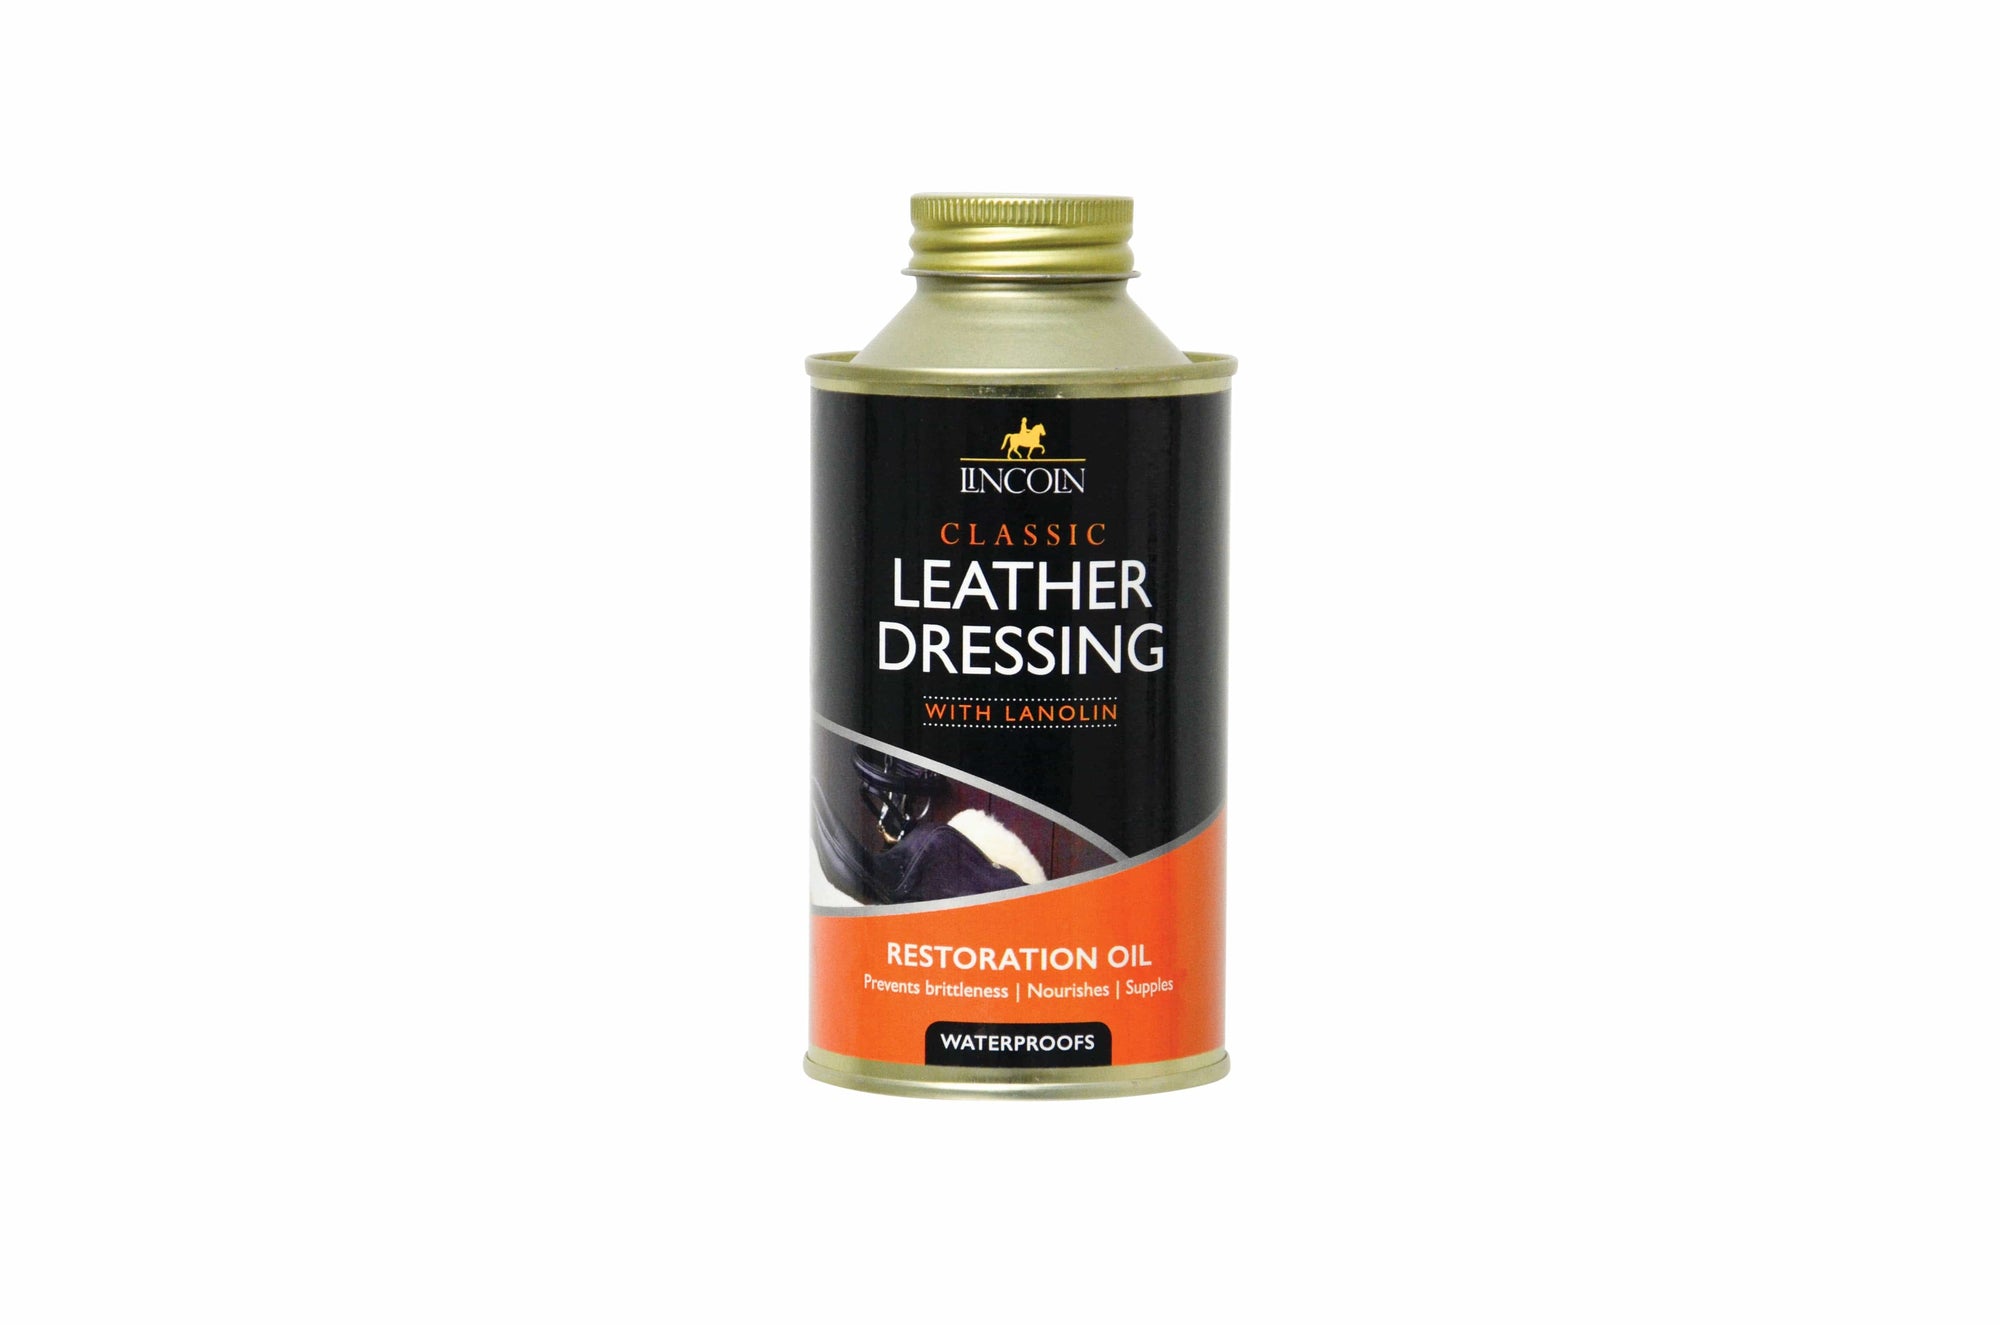 Lincoln classic leather dressing